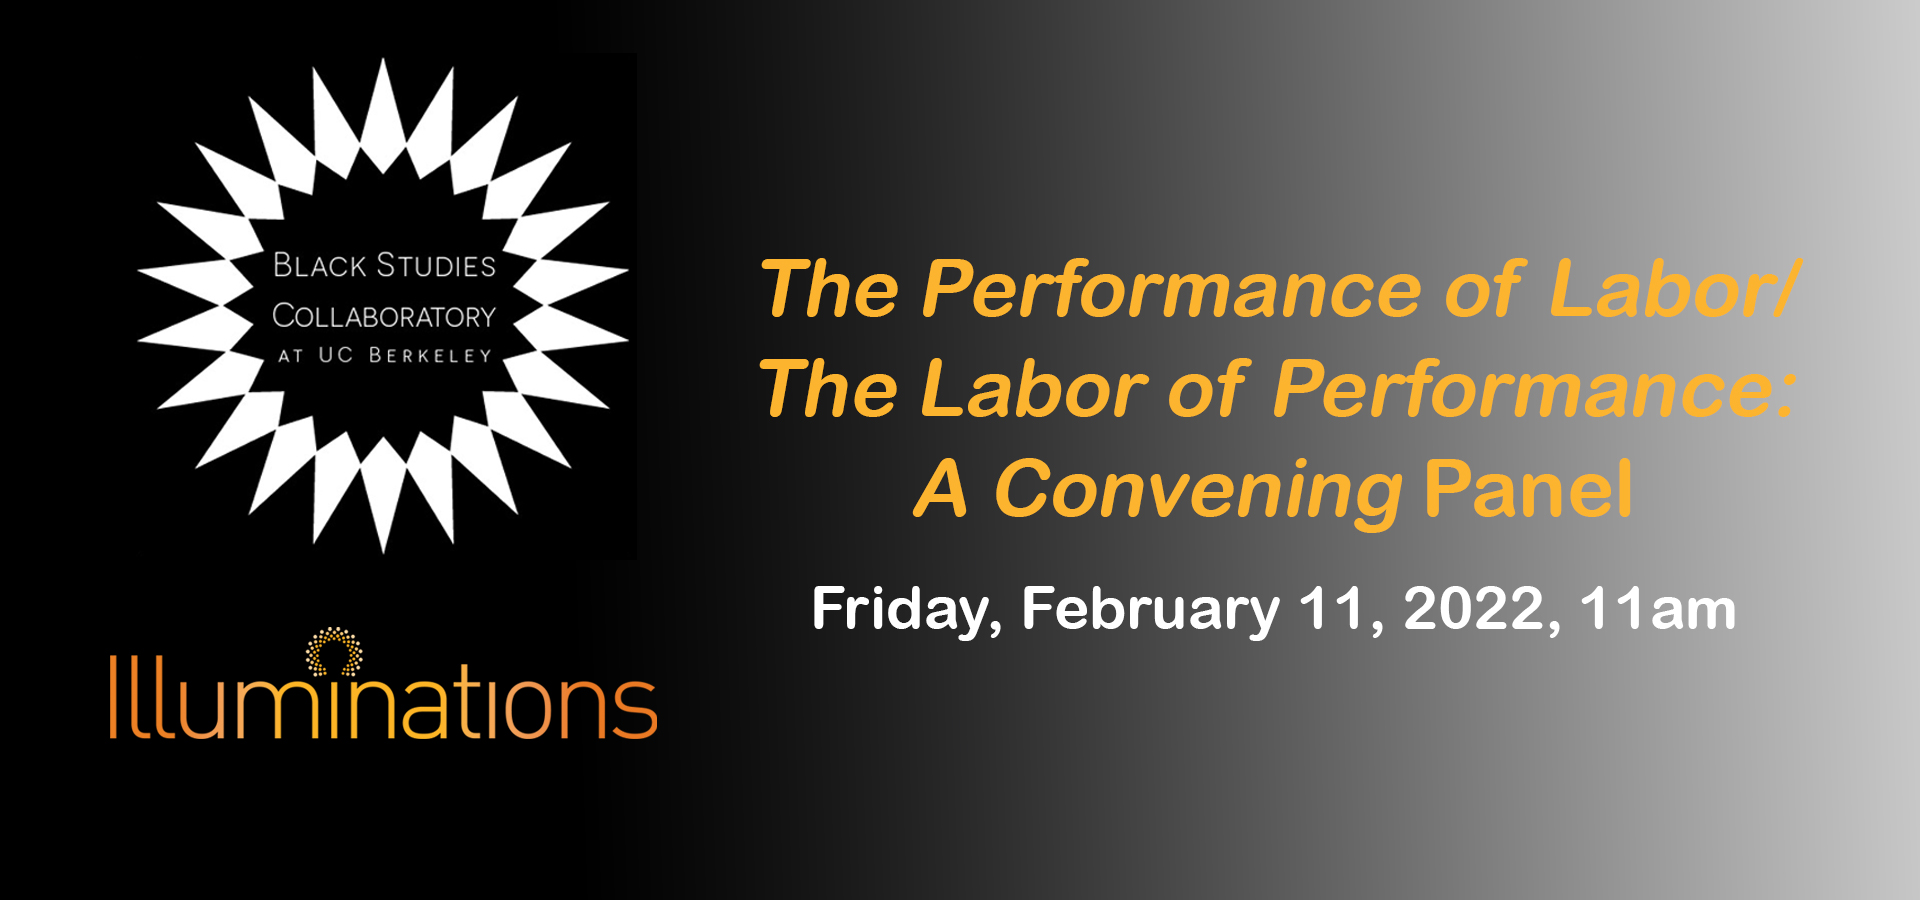 The Performance of Labor/The Labor of Performance: A Convening Panel. Feb 11, 2022, 11am